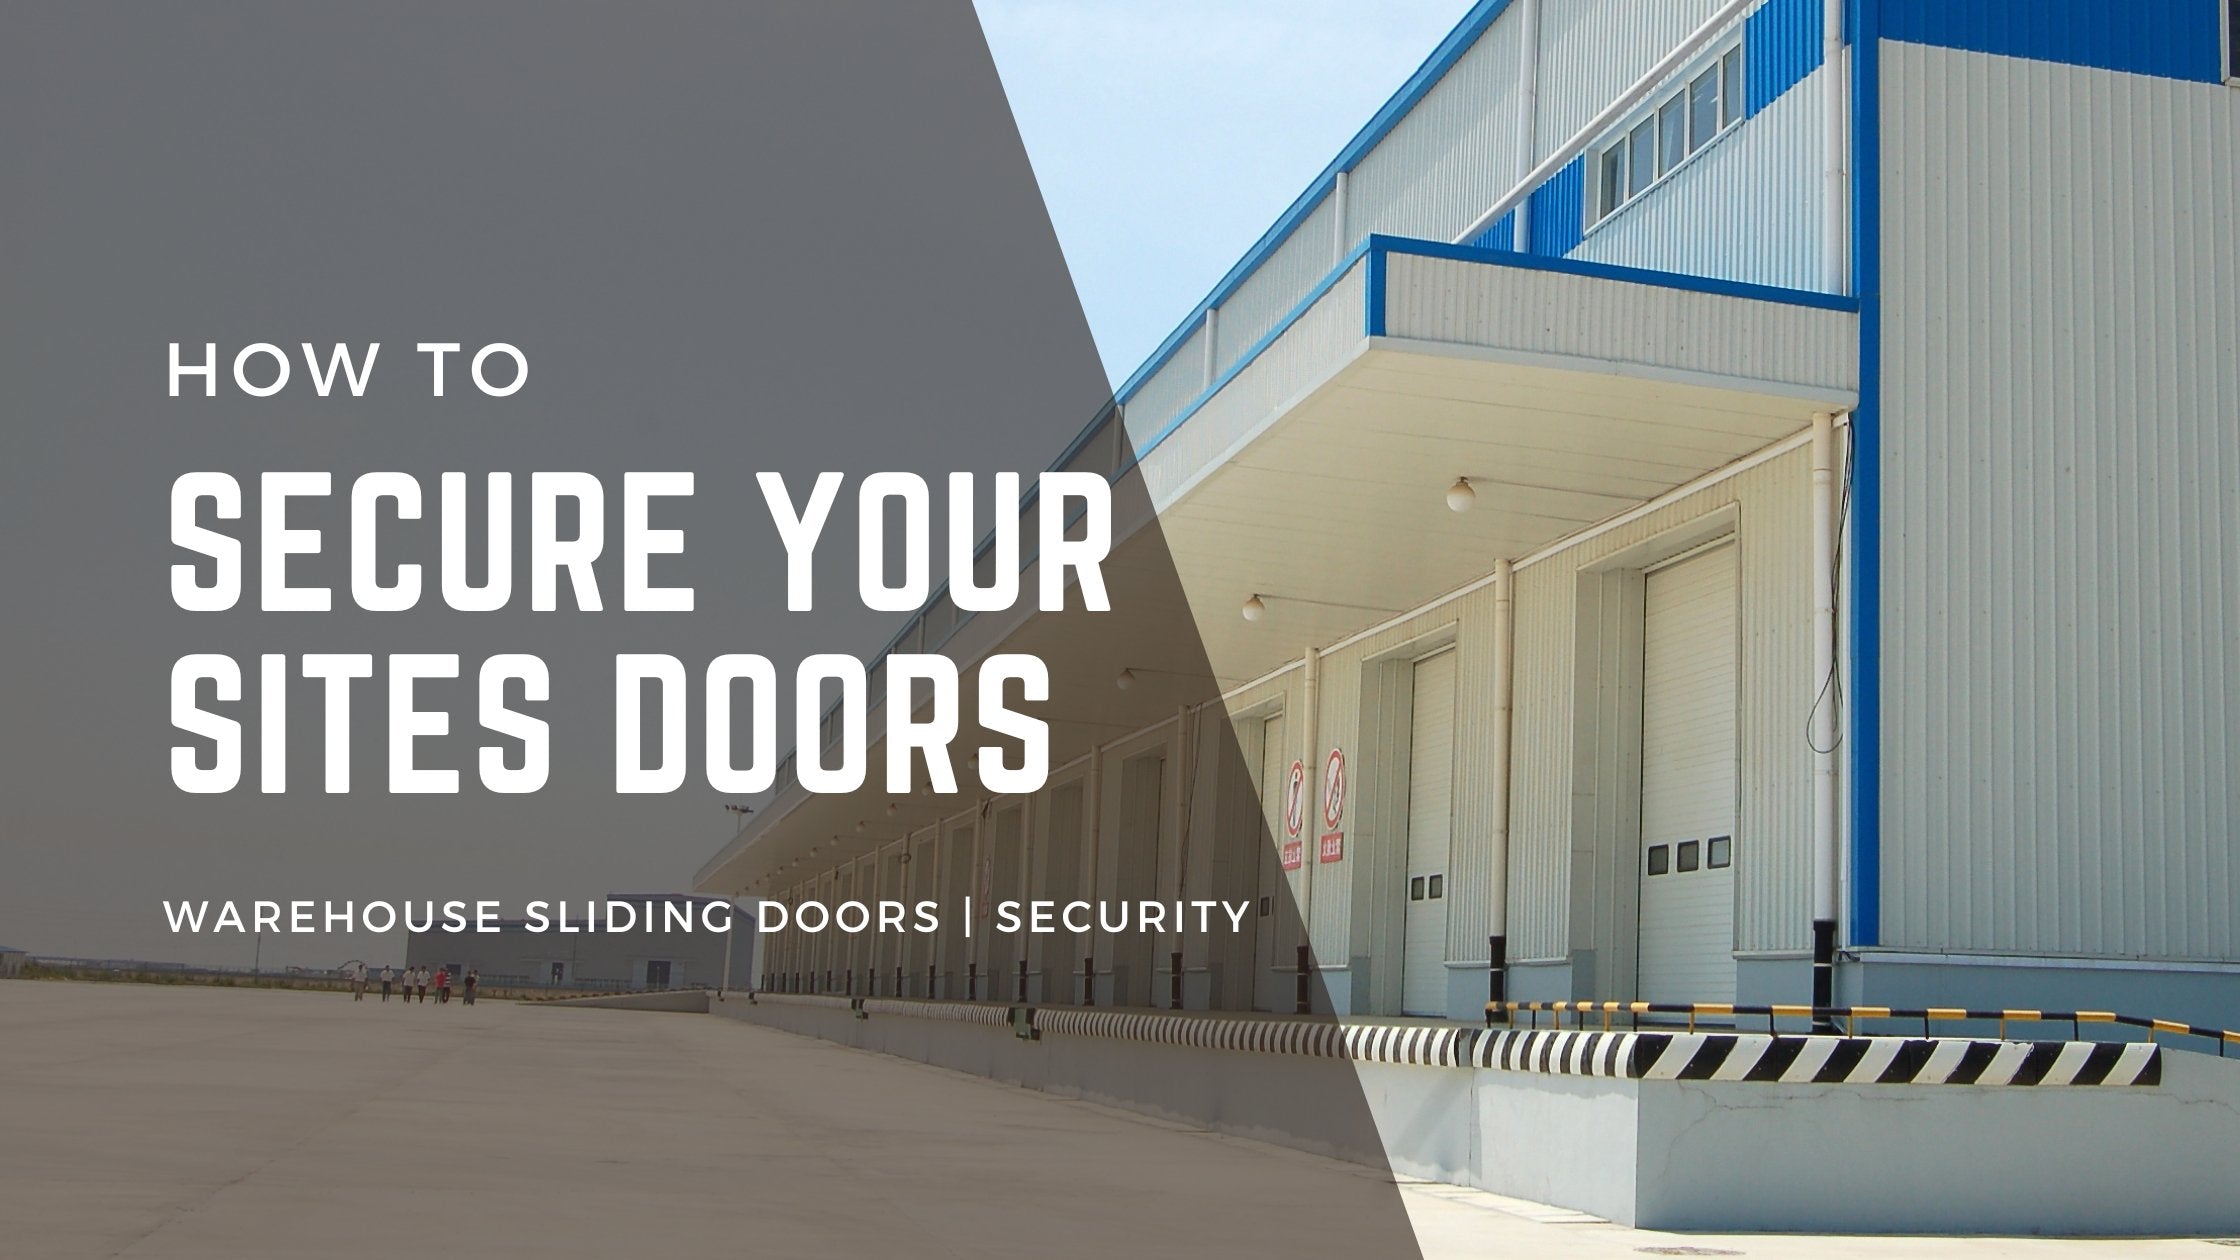 How To Secure Your Warehouse Sliding Doors | A Guide to Locking and Latching Different Doors Correctly | CoSlide NZ